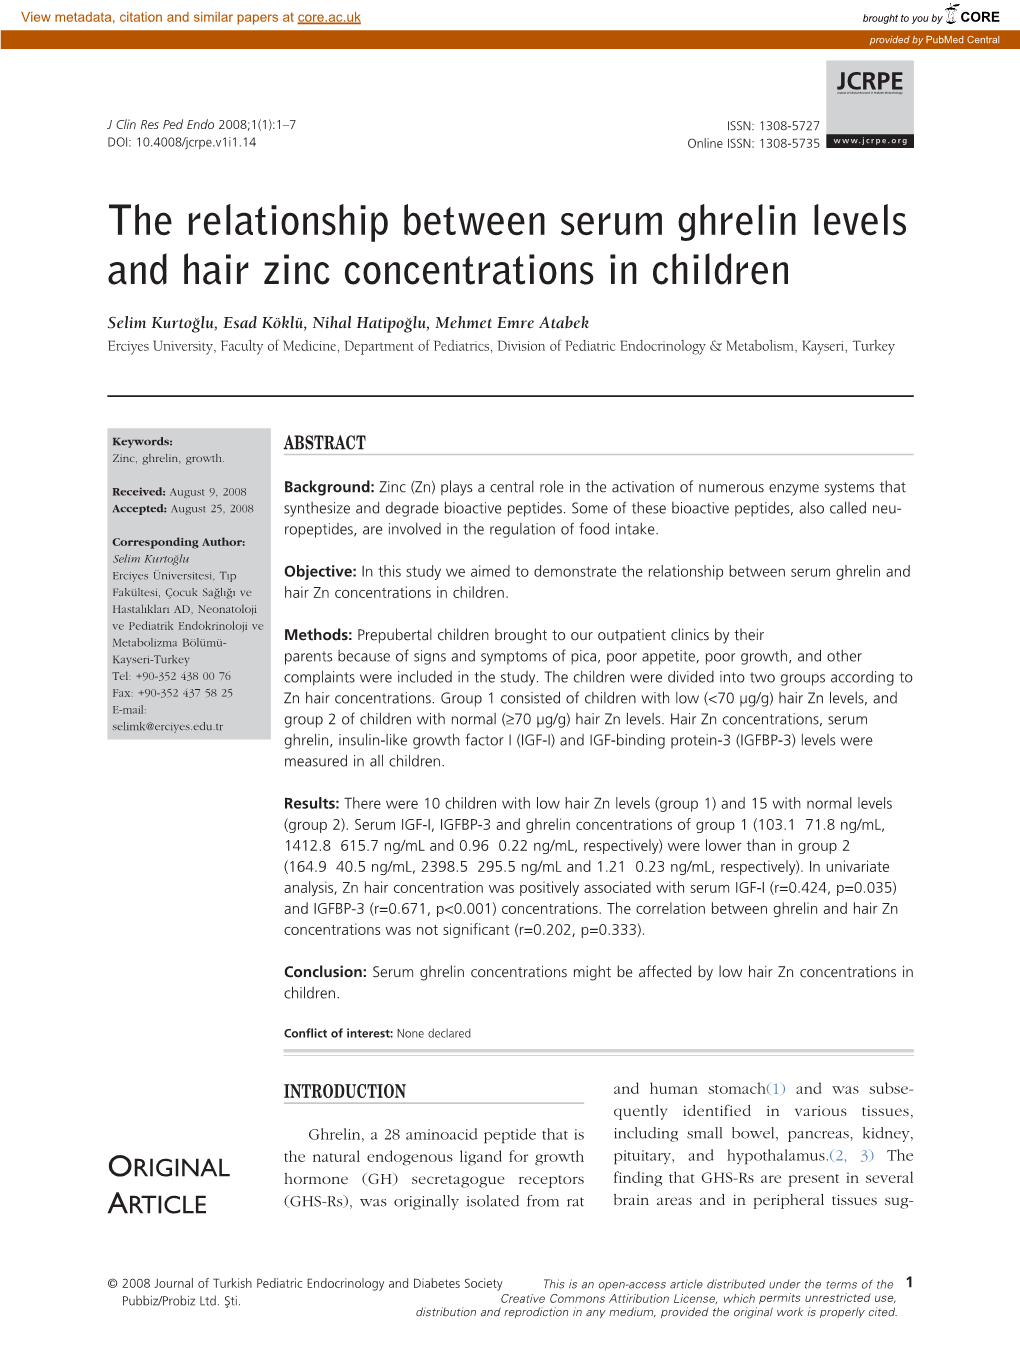 The Relationship Between Serum Ghrelin Levels and Hair Zinc Concentrations in Children